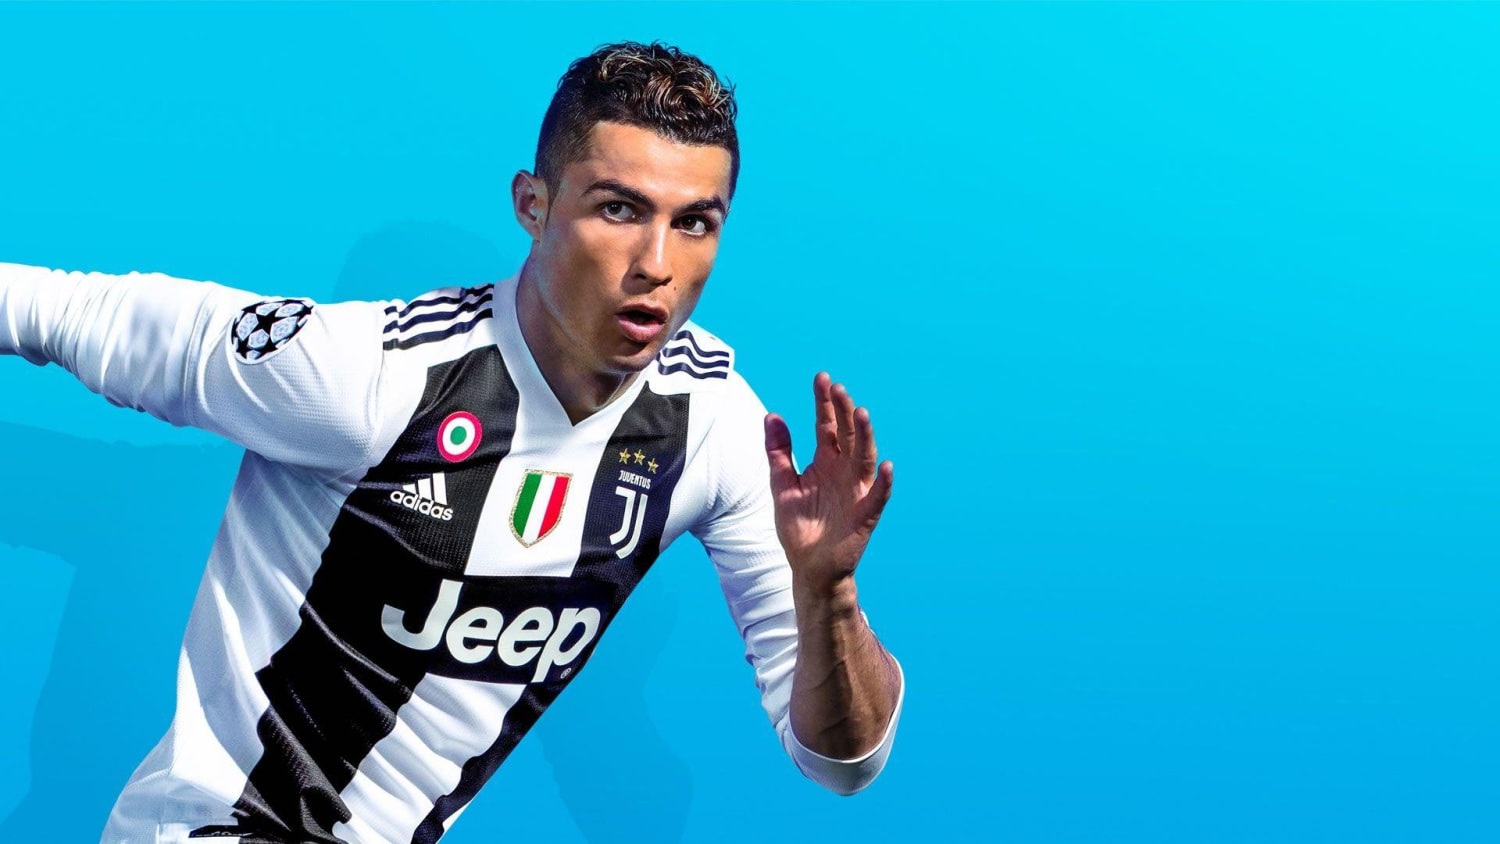 Aja Ontbering barsten Fifa 19 cheat guide: How to cheat in FIFA 19